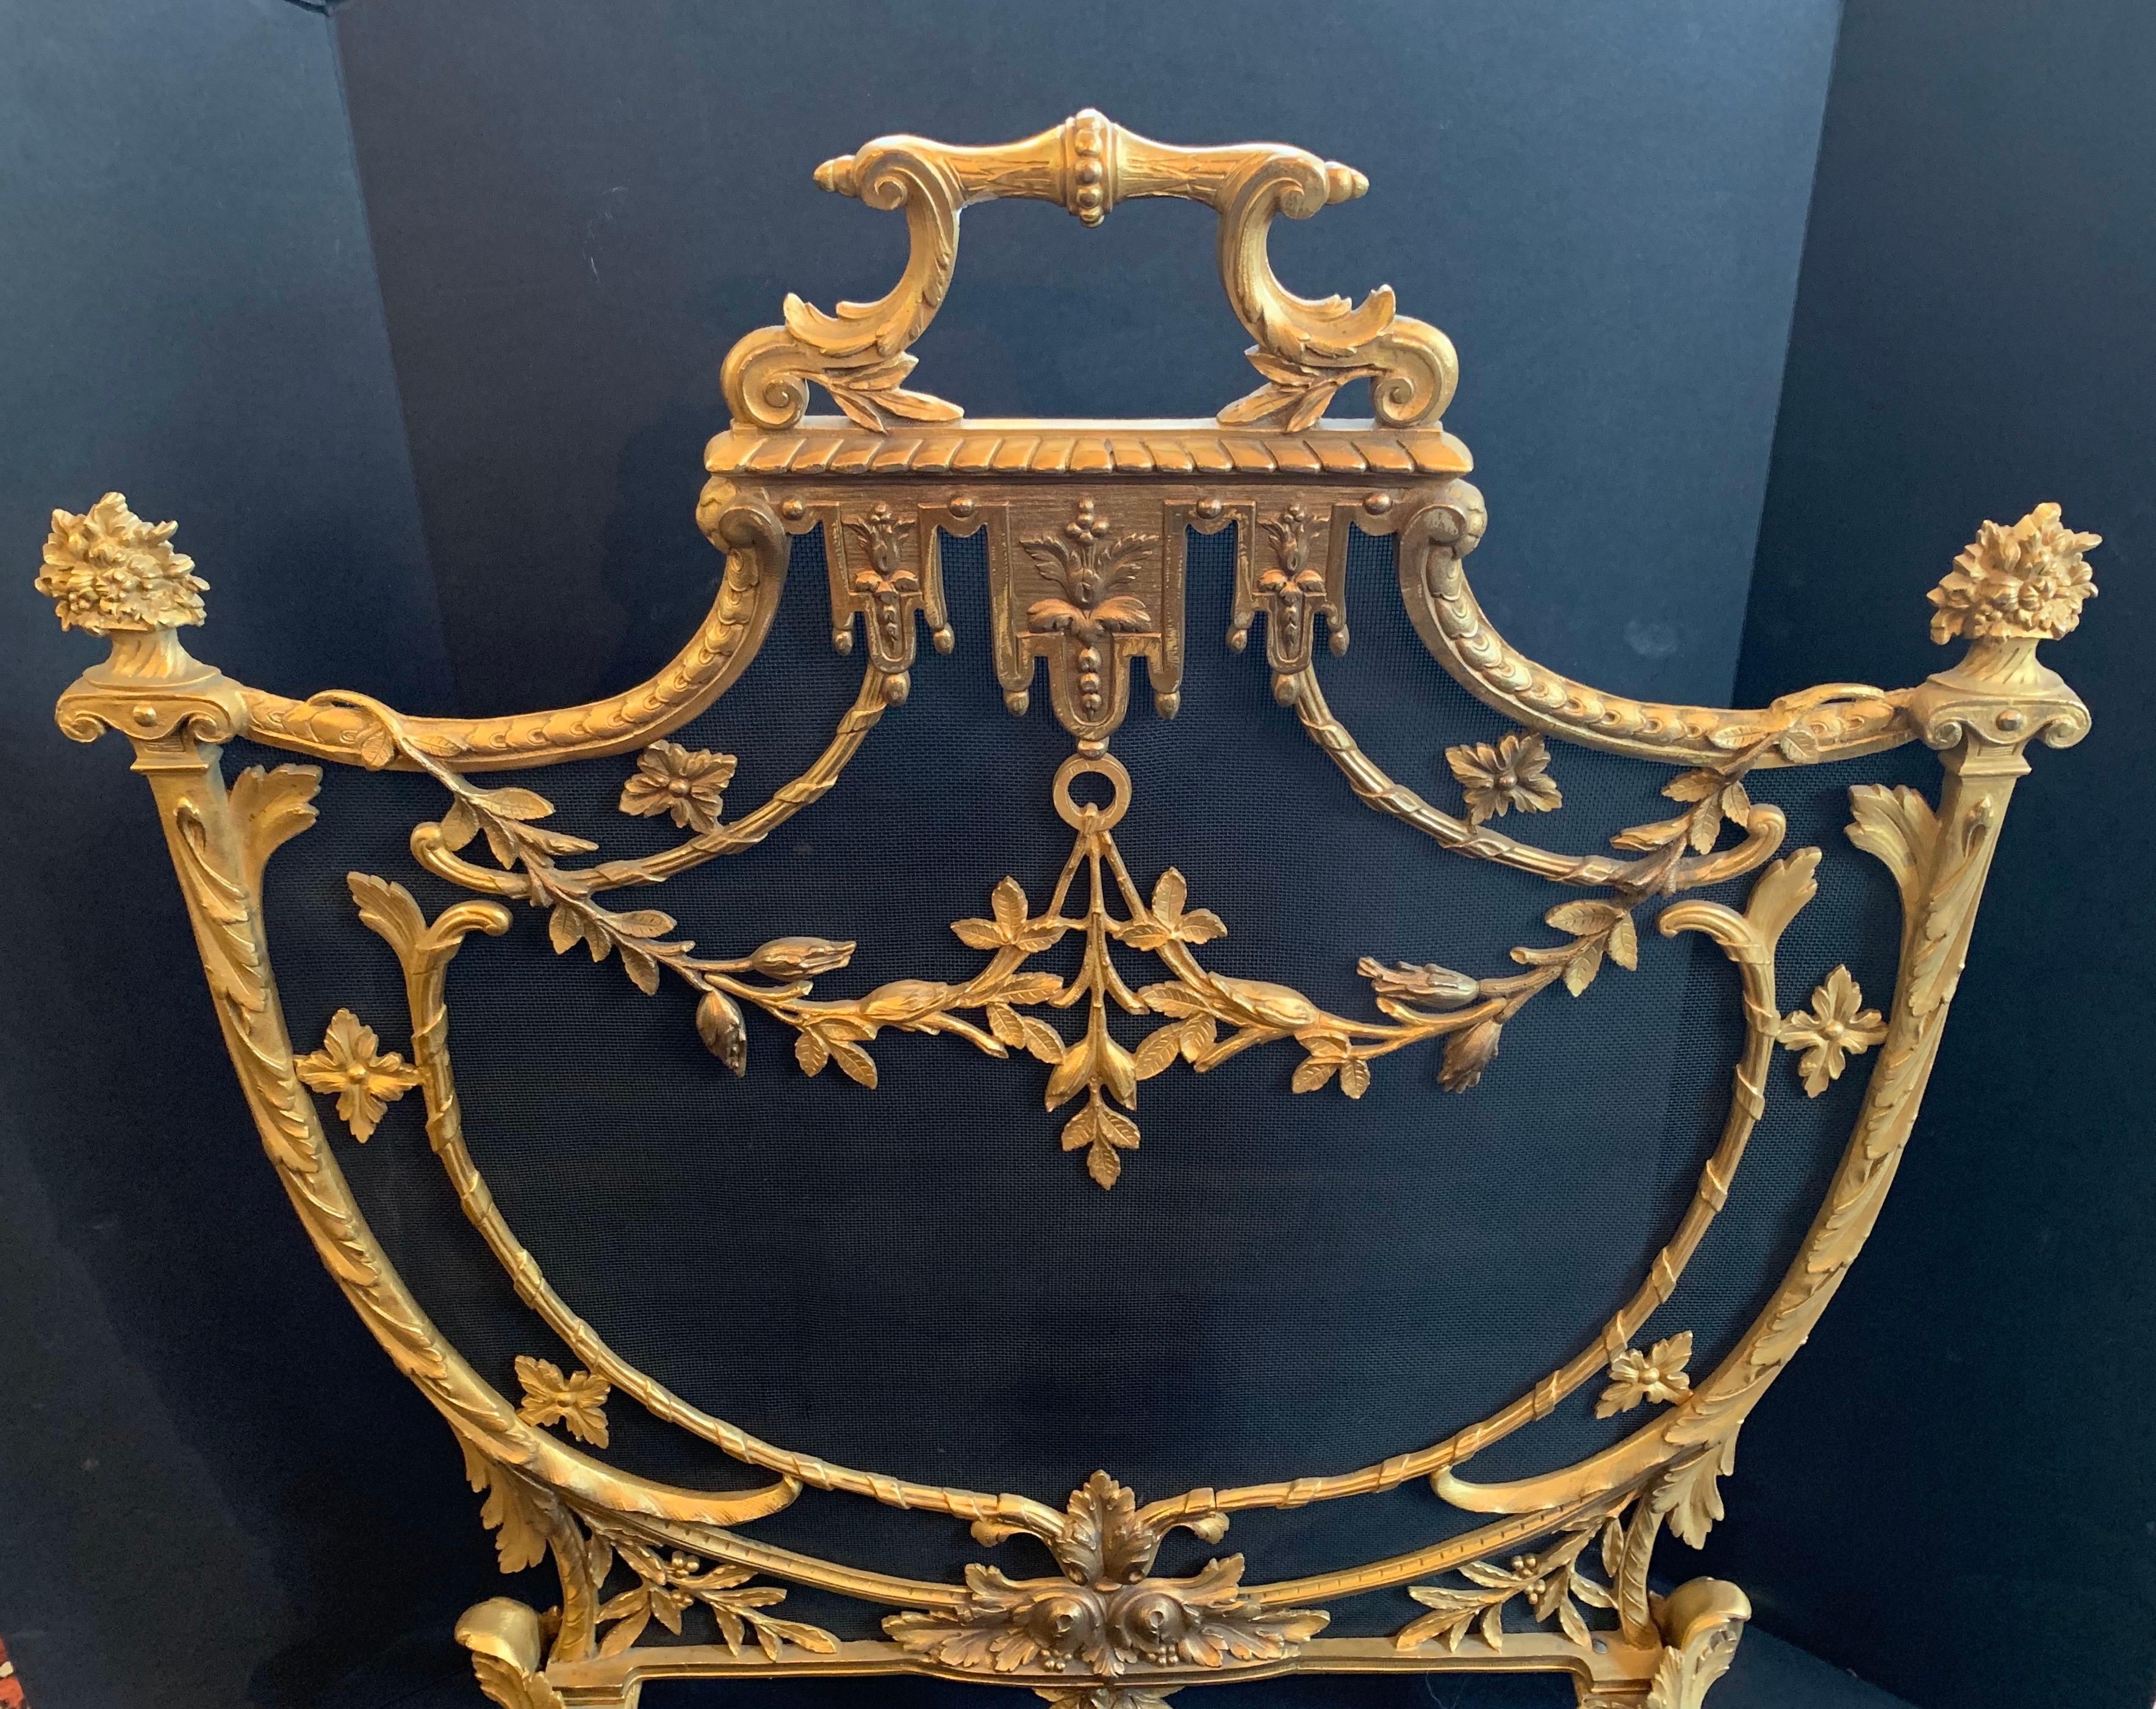 A wonderful French Louis XV style, dore bronze fireplace garland swag shield form screen.